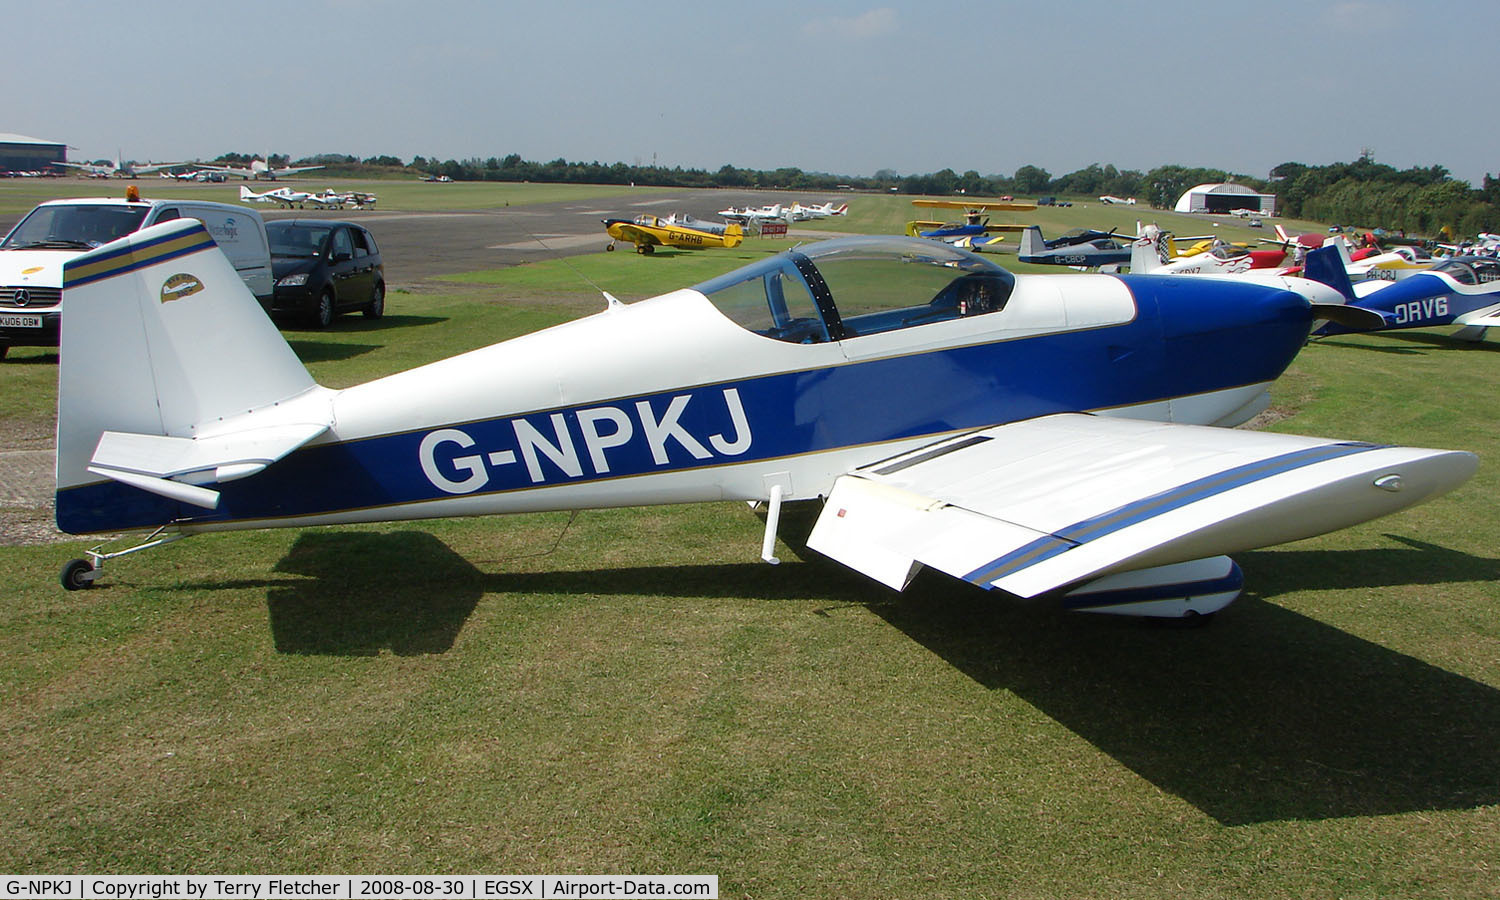 G-NPKJ, 1998 Vans RV-6 C/N PFA 181-13138, Participant in the 2008 RV Fly-in at North Weald Uk